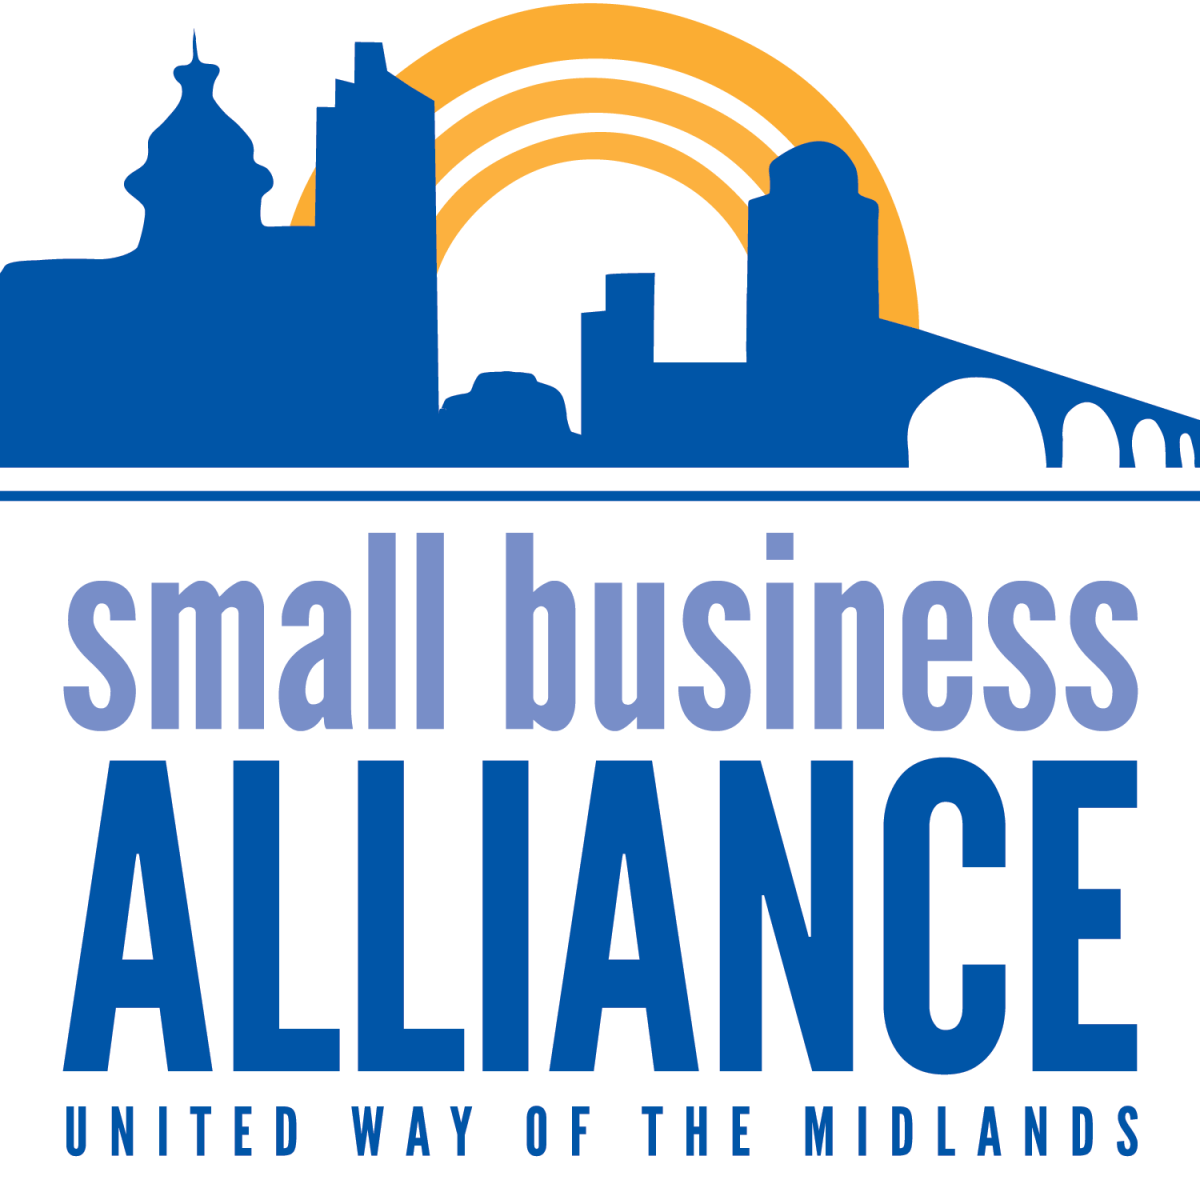 Small SBA Logo - Small Business Alliance | United Way of the Midlands